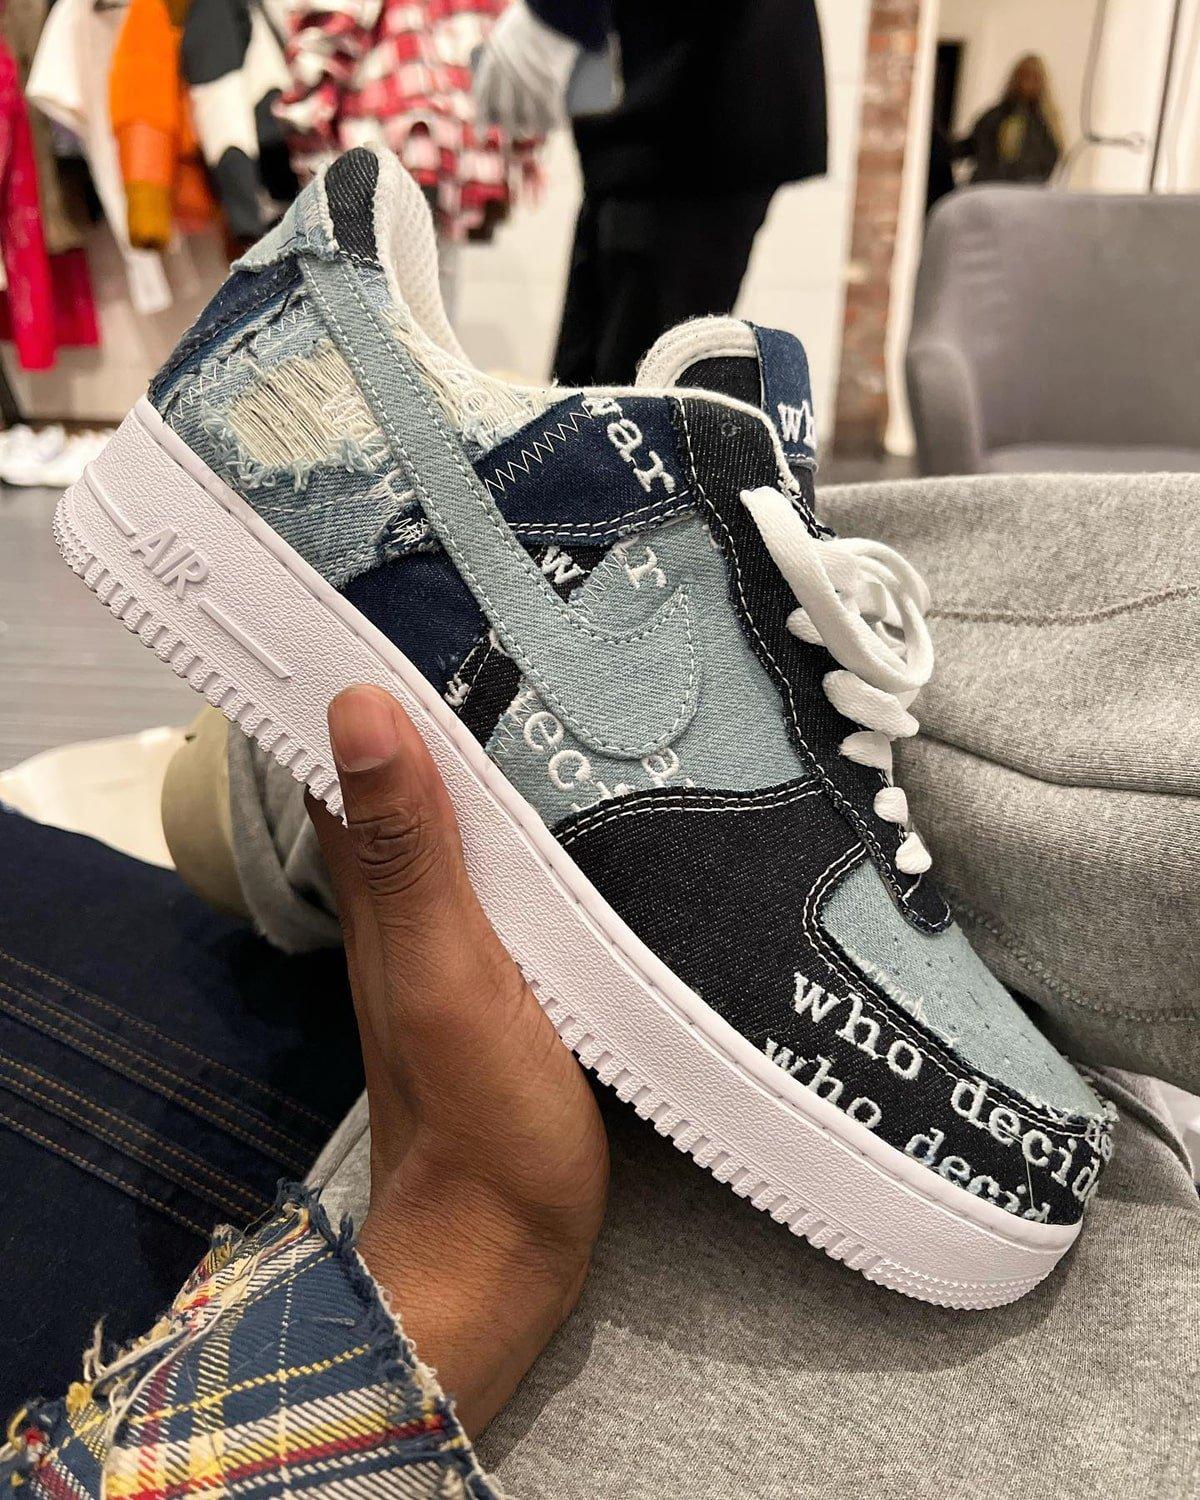 Who Decides War x Nike Air Force 1 Low